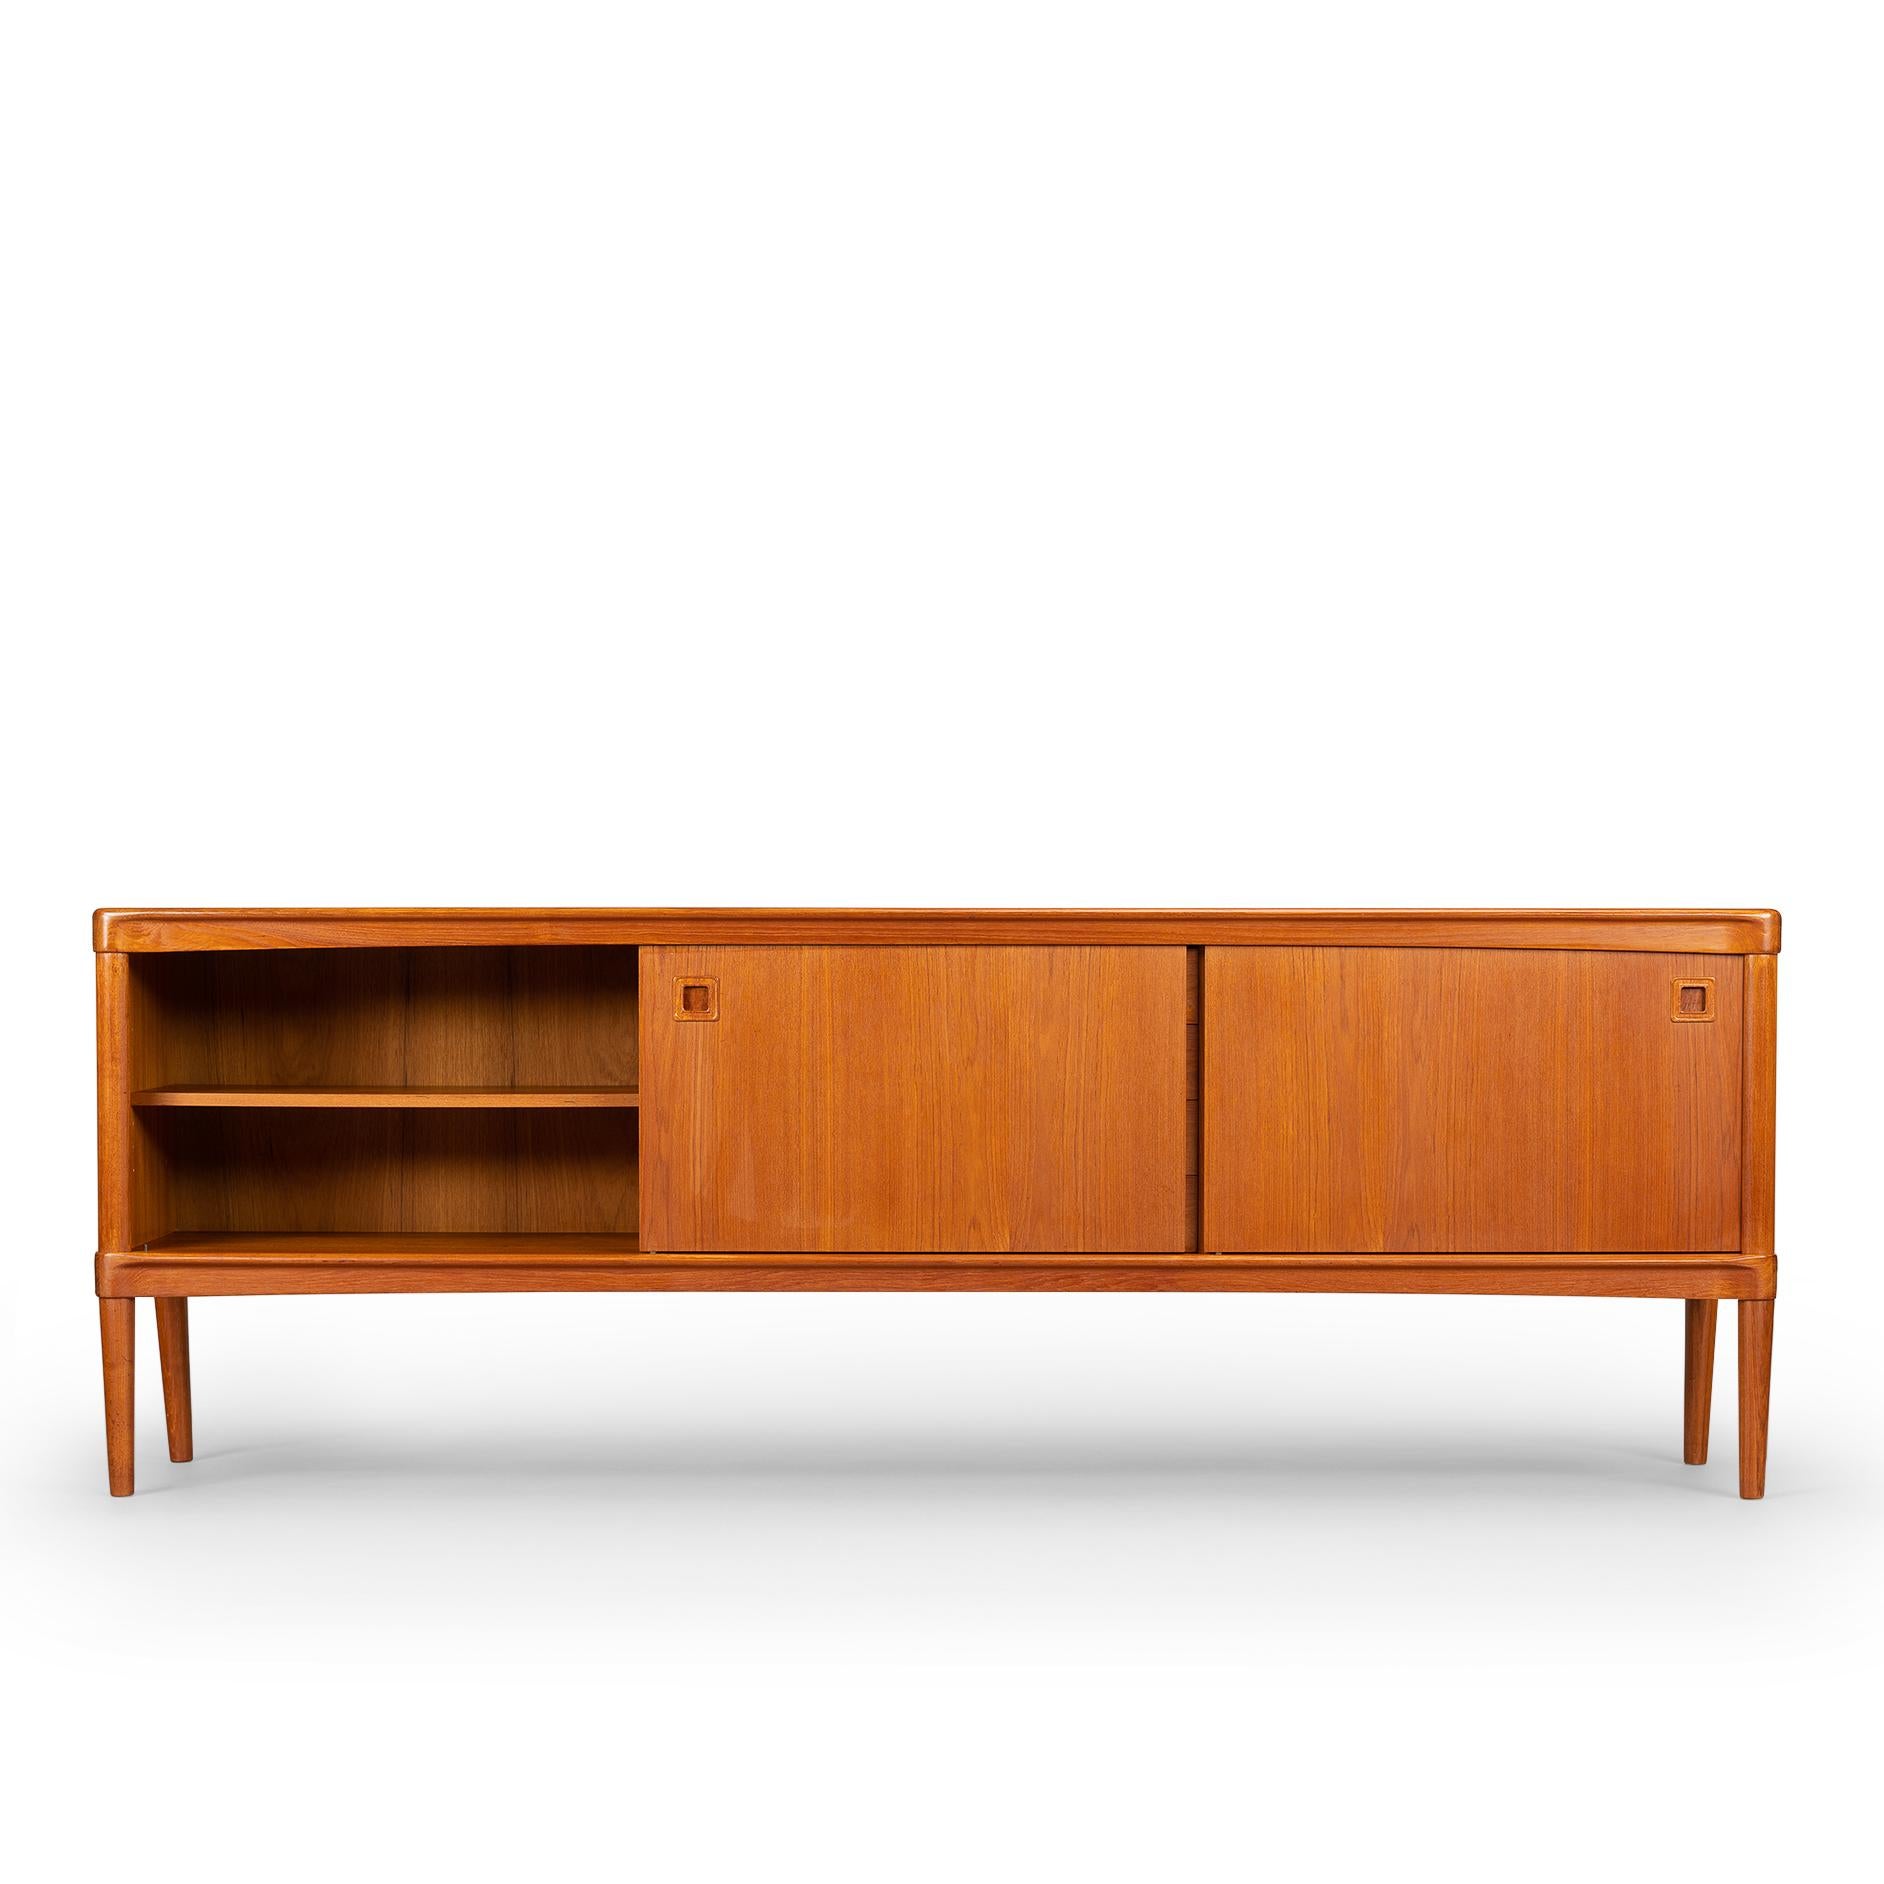 This credenza by H.W. Klein has some very nice design features. The back legs are positioned inward and bring a twist to this credenza design! Klein was inspired by natural shapes and curvature and worked this inspiration into furniture designs with